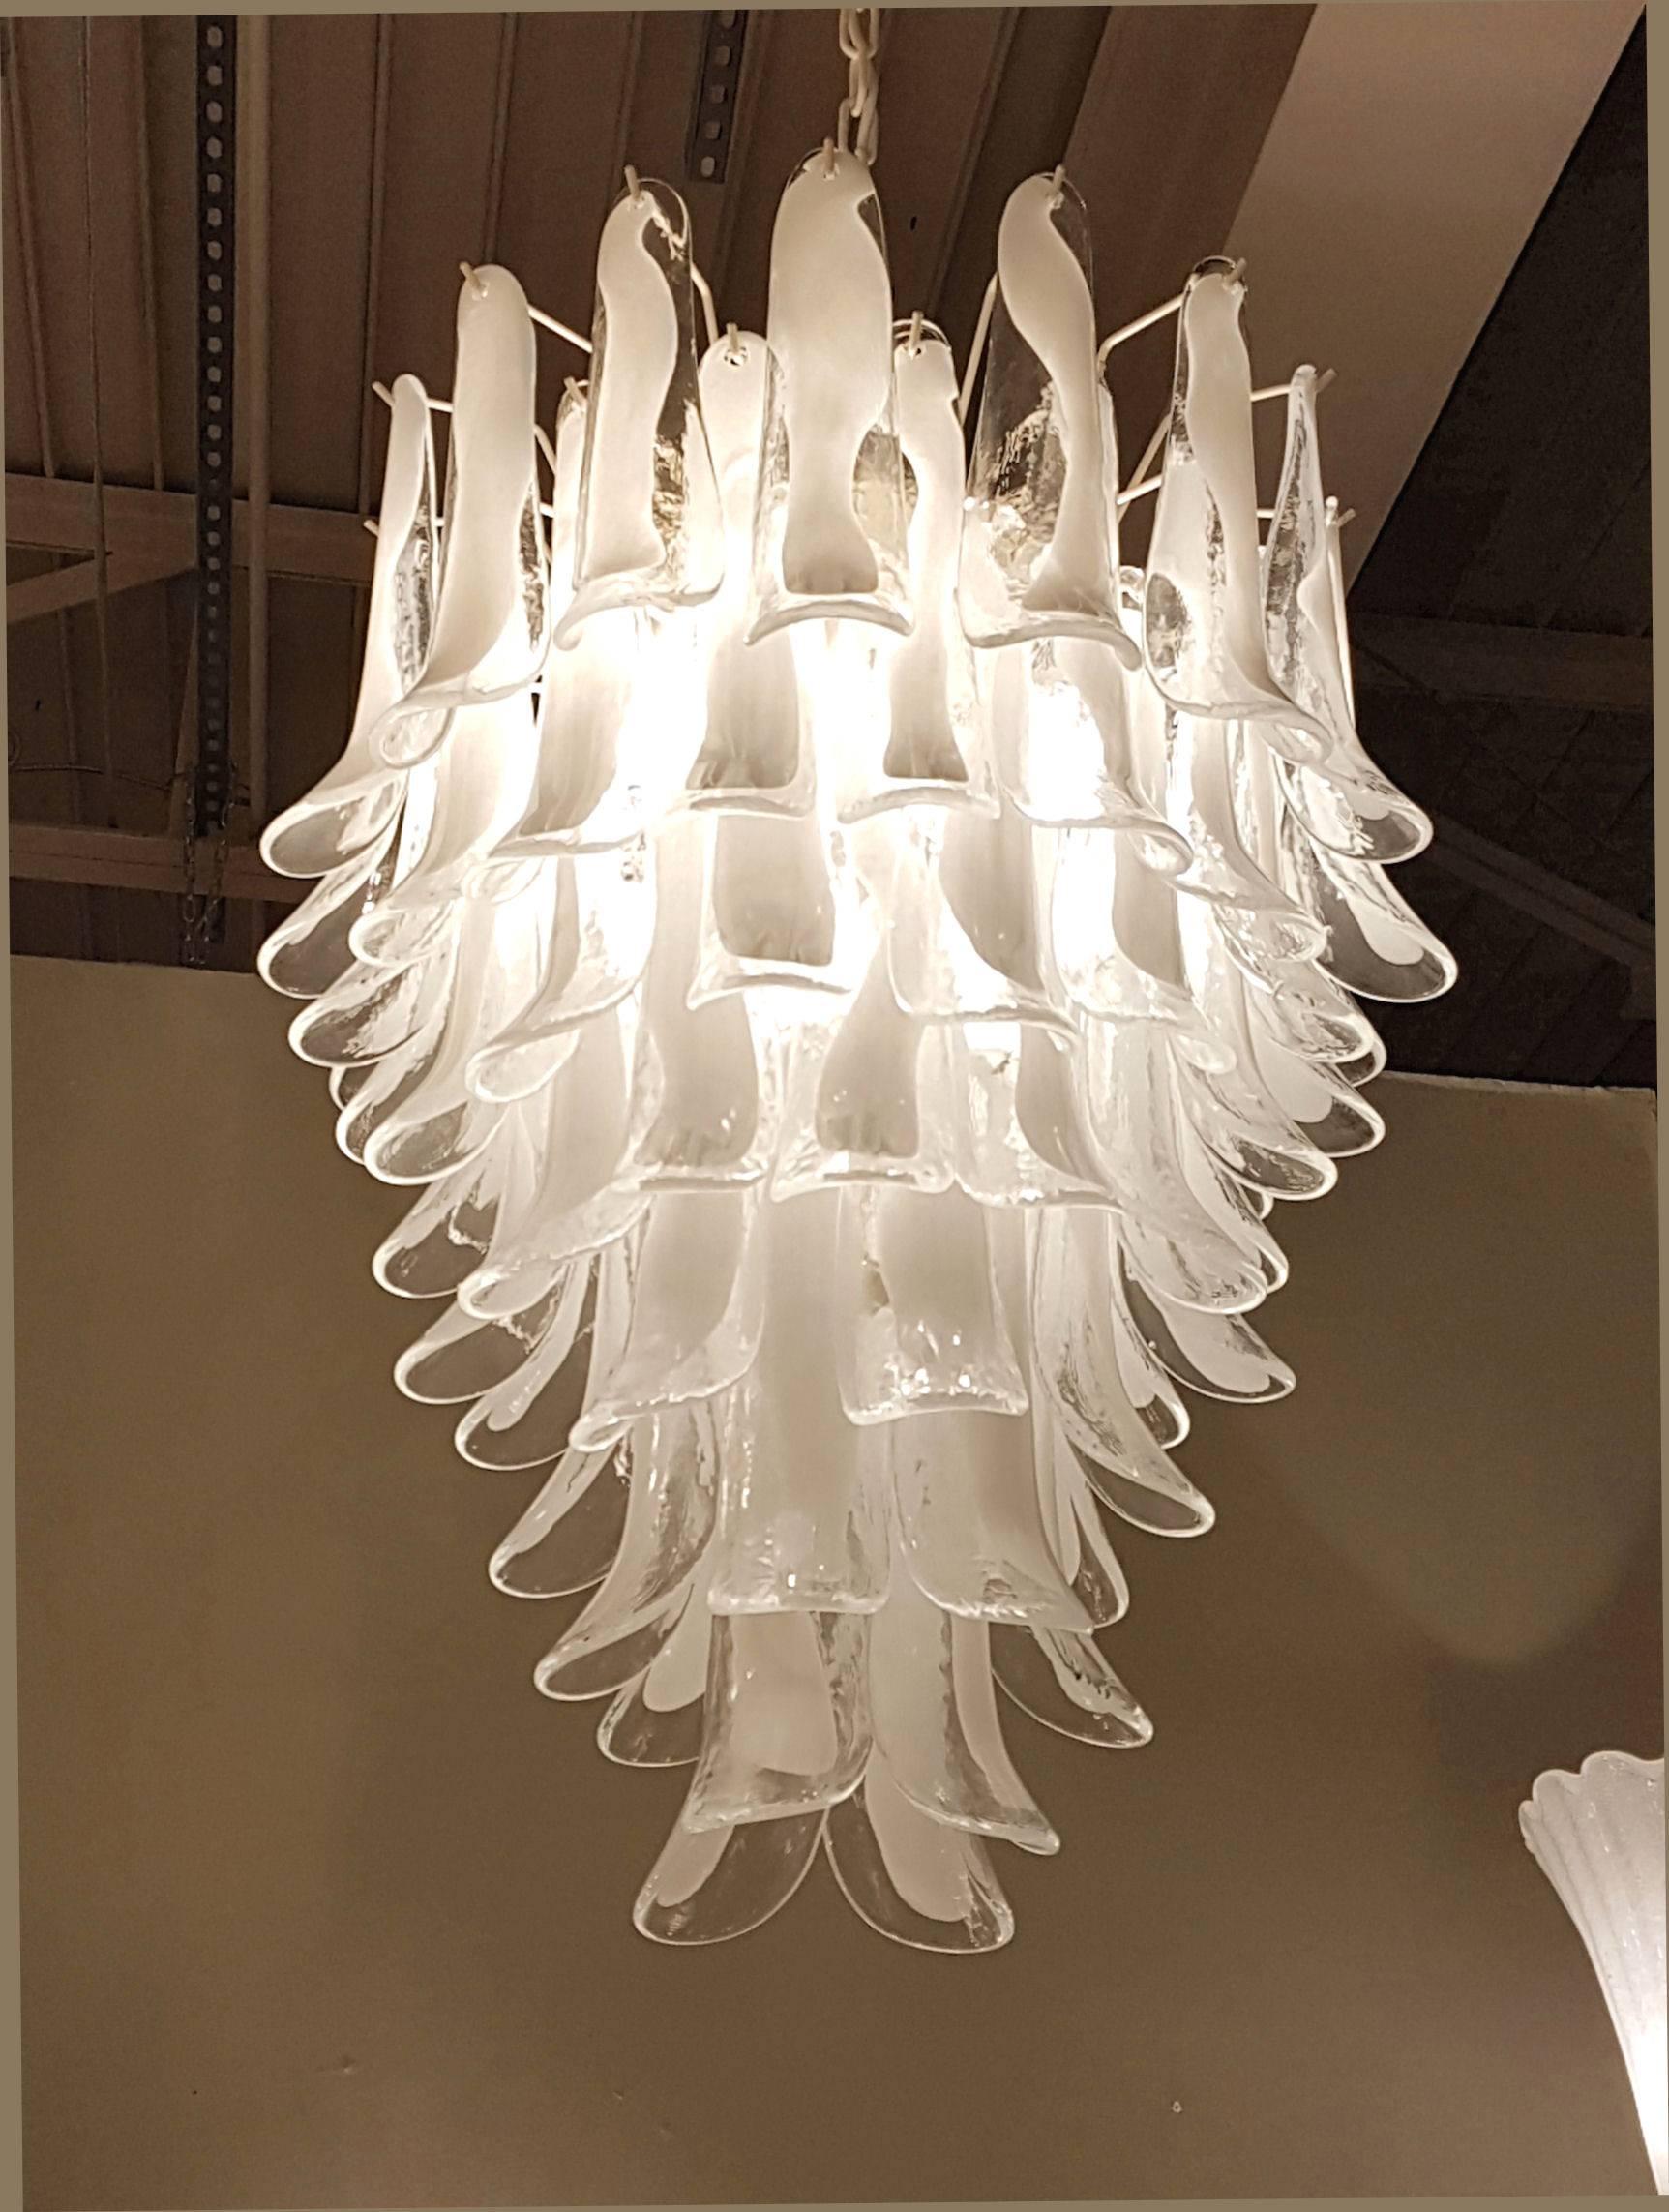 Mid-Century Modern white and clear Murano glass petals chandelier.
By Mazzega, Italy, 1970s.
Eight-tiers Murano chandelier. Seven candelabra base lights, rewired. 
Ivory metal frame and chain. 
The white and clear petals keep their white color